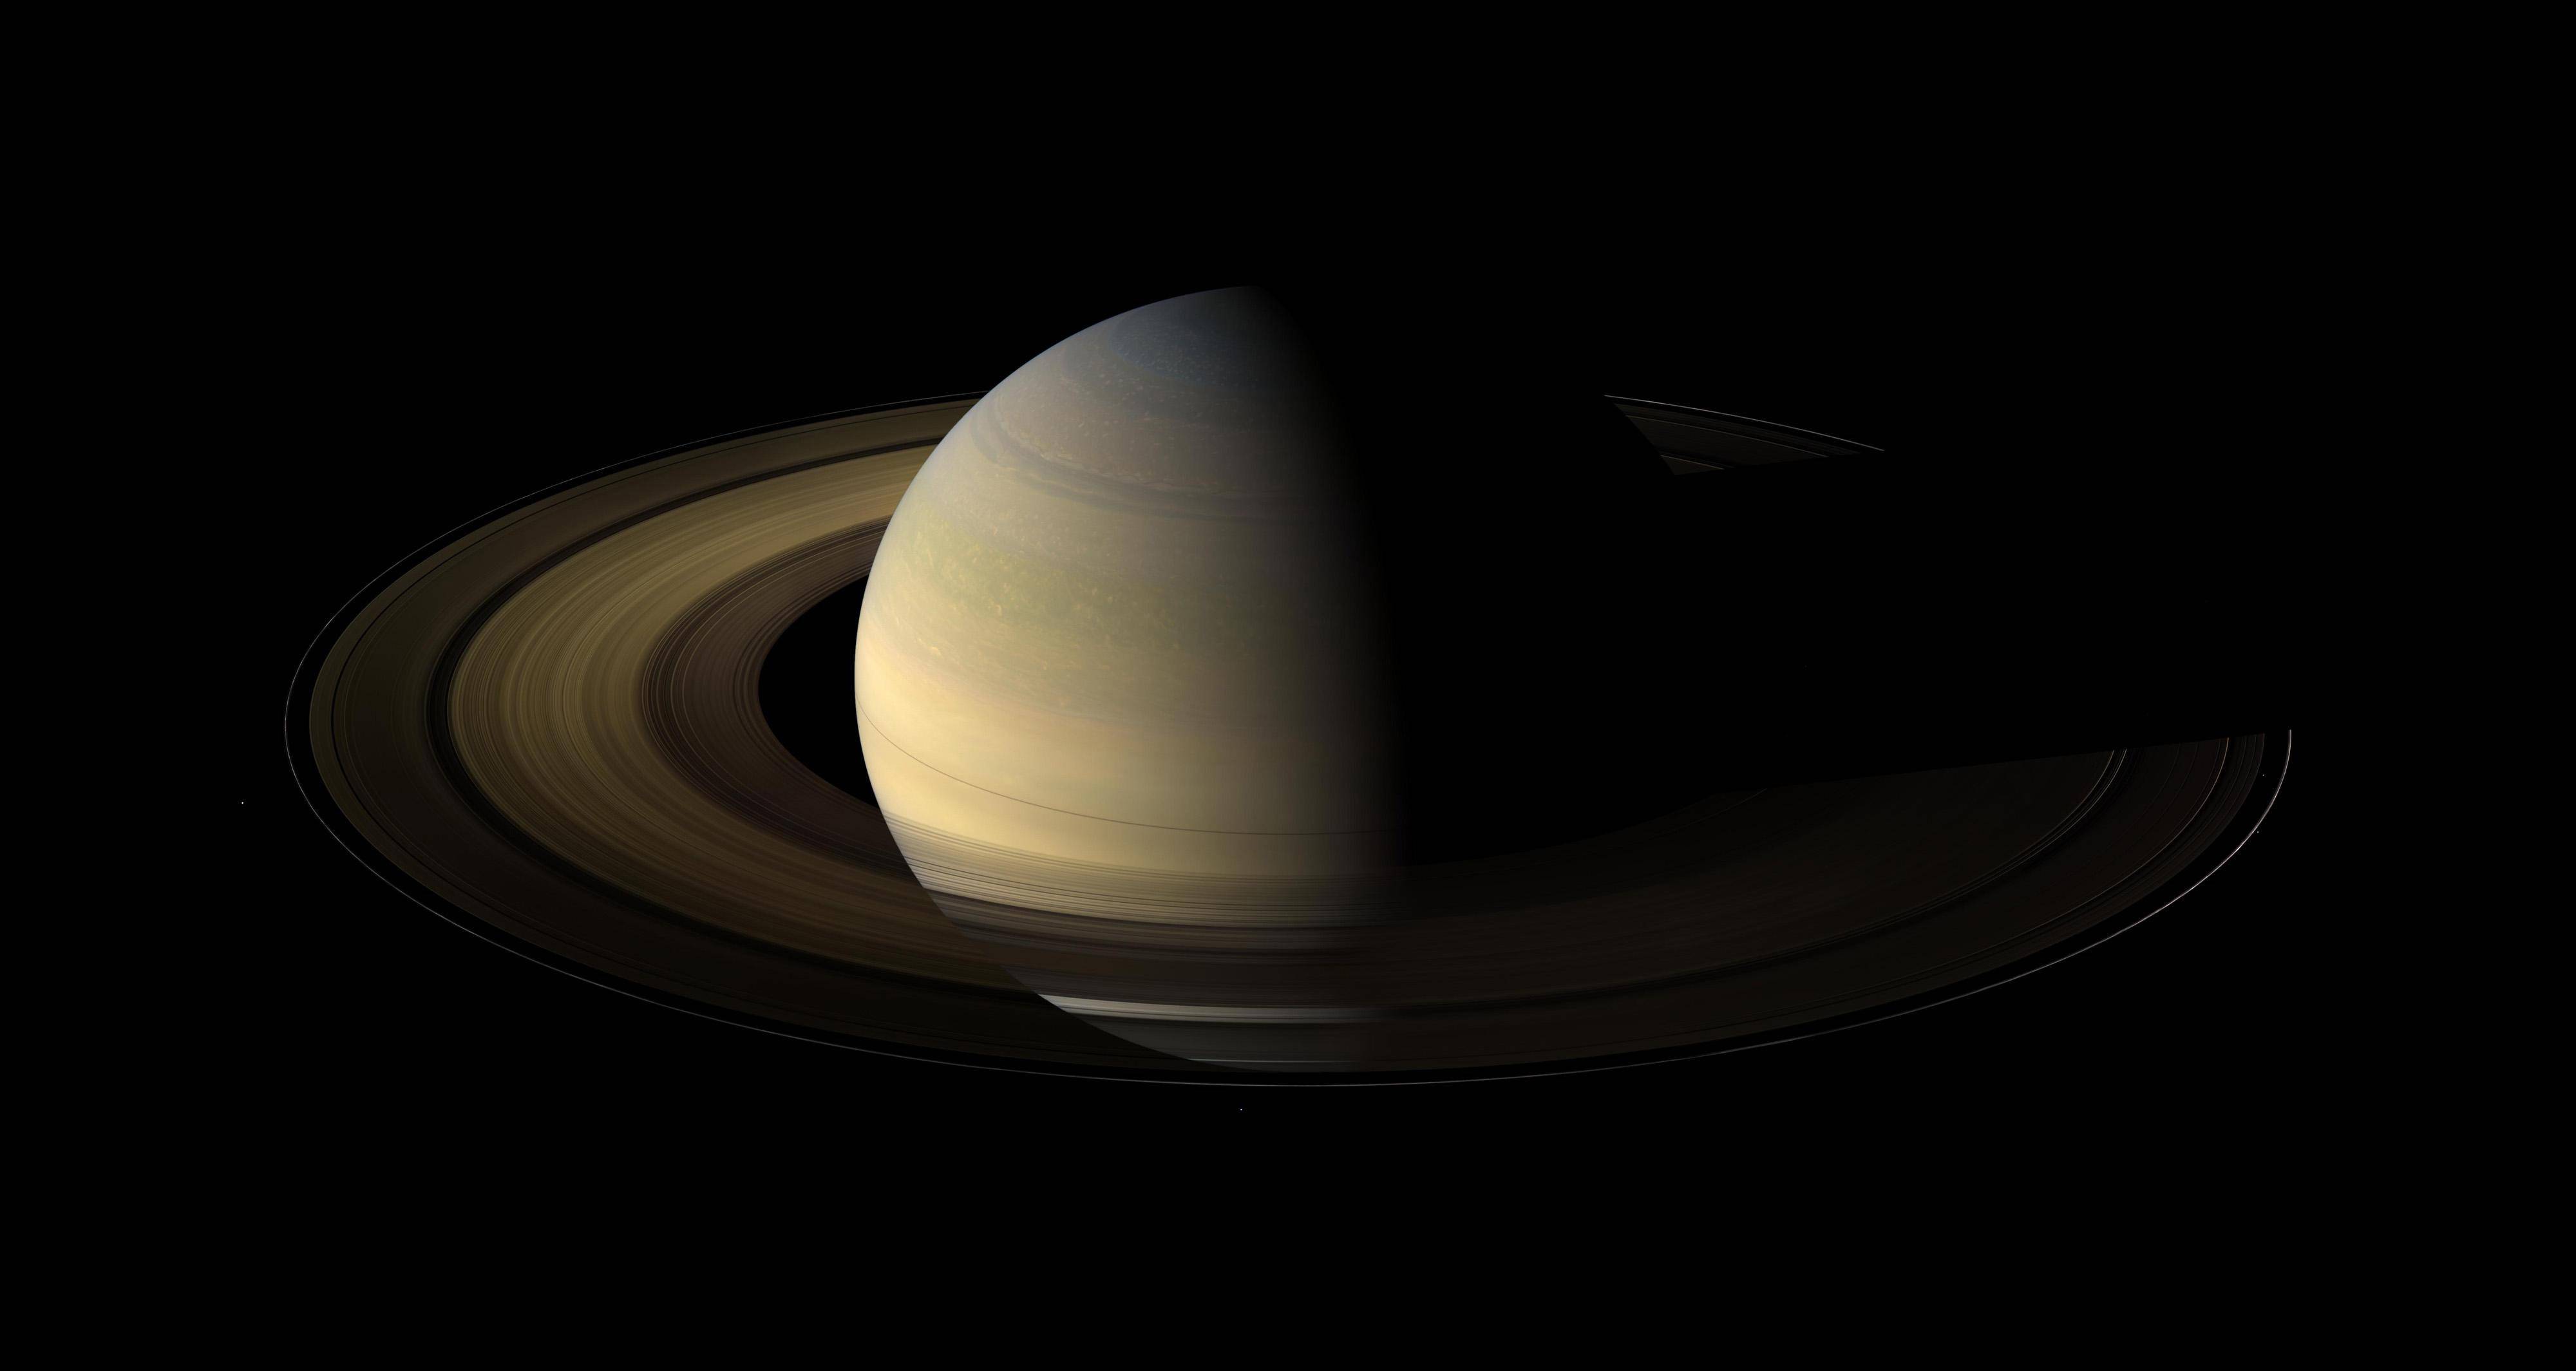 This NASA handout image obtained October 19, 2009 shows Saturn during an equinox captured by the robot explorer Cassini. The images comprising the mosaic, taken over about eight hours, were extensively processed before being joined together. With no enhancement, the rings would be essentially invisible in this mosaic. To improve their visibility, the dark right half of the rings has been brightened relative to the brighter left half by a factor of three, and then the whole ring system has been brightened by a factor of 20 relative to the planet. So the dark half of the rings is 60 times brighter, and the bright half 20 times brighter, than they would have appeared if the entire system, planet included, could have been captured in a single image.The images were taken on August 12, 2009, beginning about 1.25 days after exact equinox, using the red, green and blue spectral filters of the wide angle camera and were combined to create this natural color view. The images were obtained at a distance of approximately 526,000 miles from Saturn and at a Sun-Saturn-spacecraft, or phase, angle of 74 degrees. Image scale is 31 miles per pixel. AFP PHOTO/NASA/JPL/SPACE/RESTRICTED TO EDITORIAL USE / AFP PHOTO / NASA / HO